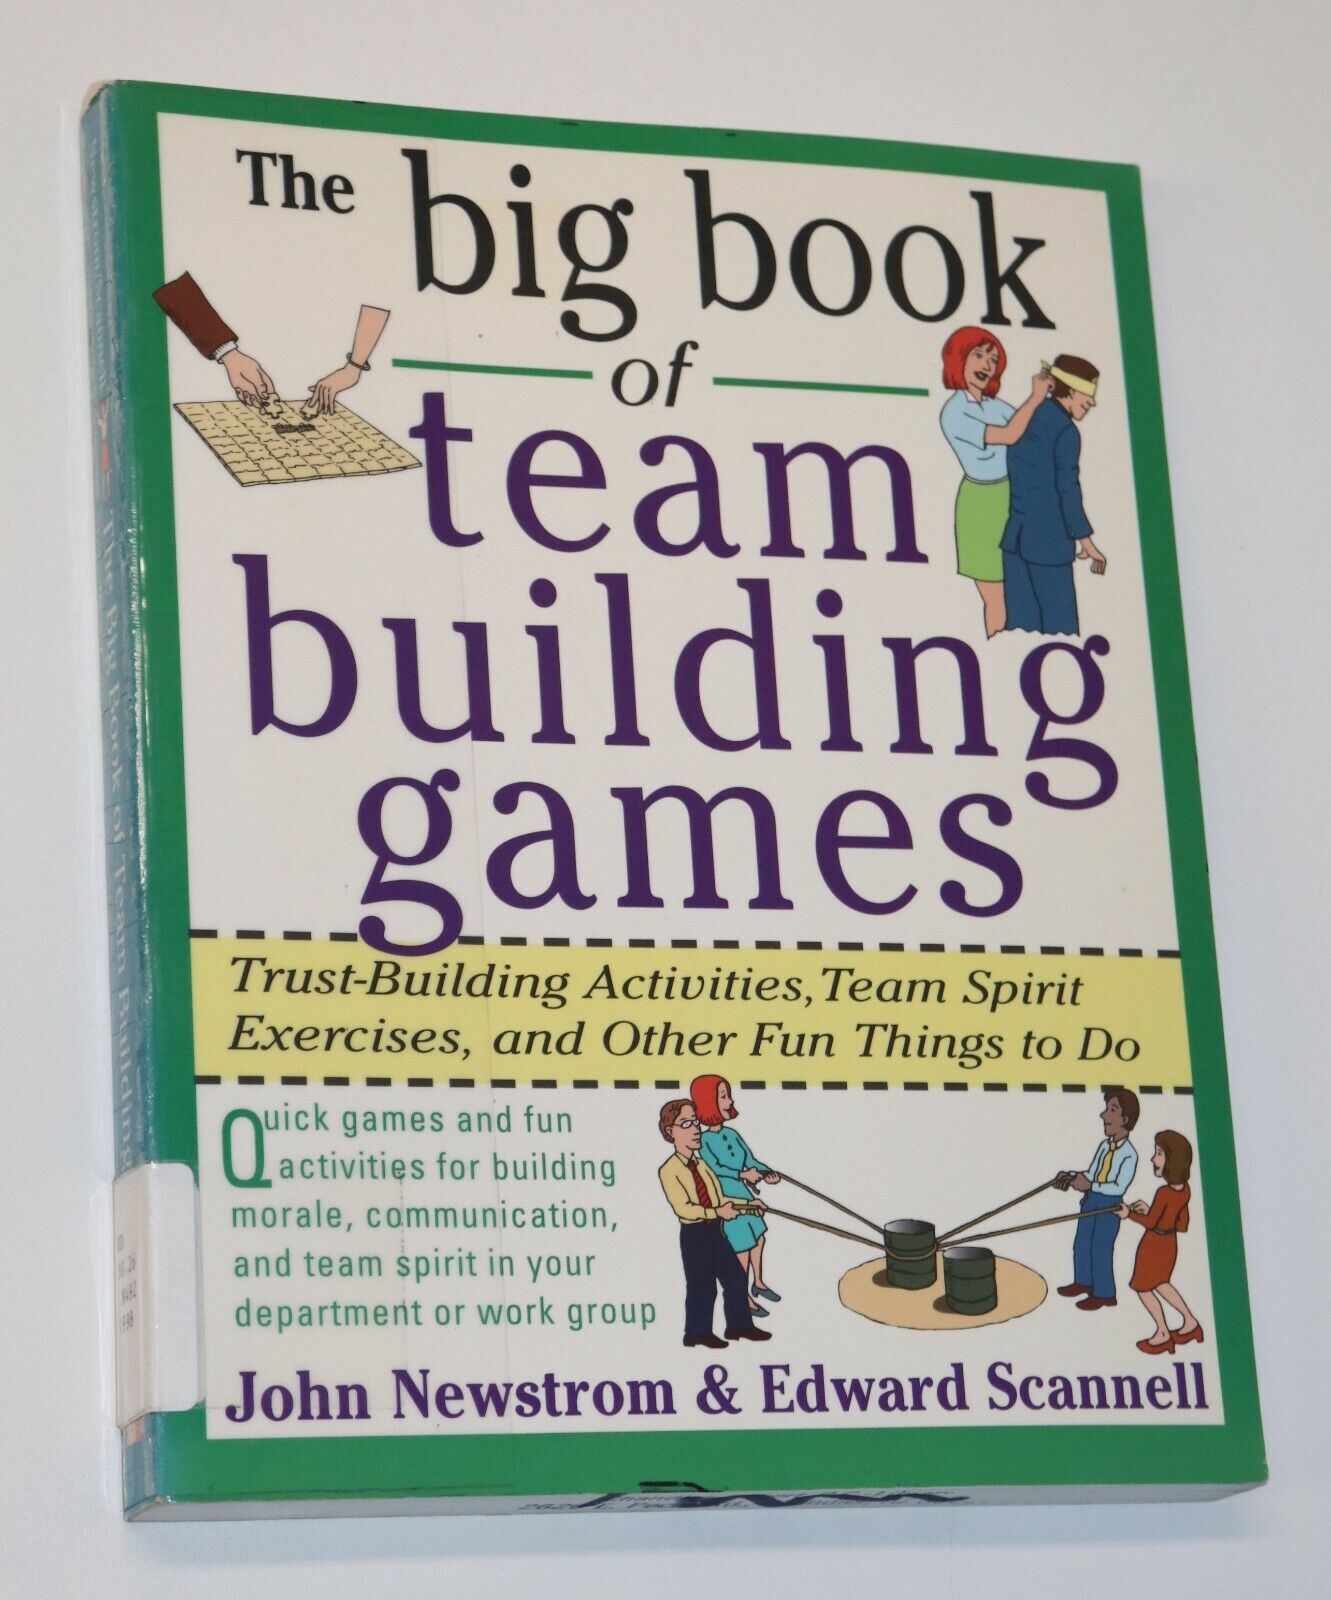 The Big Book of Team Building Games